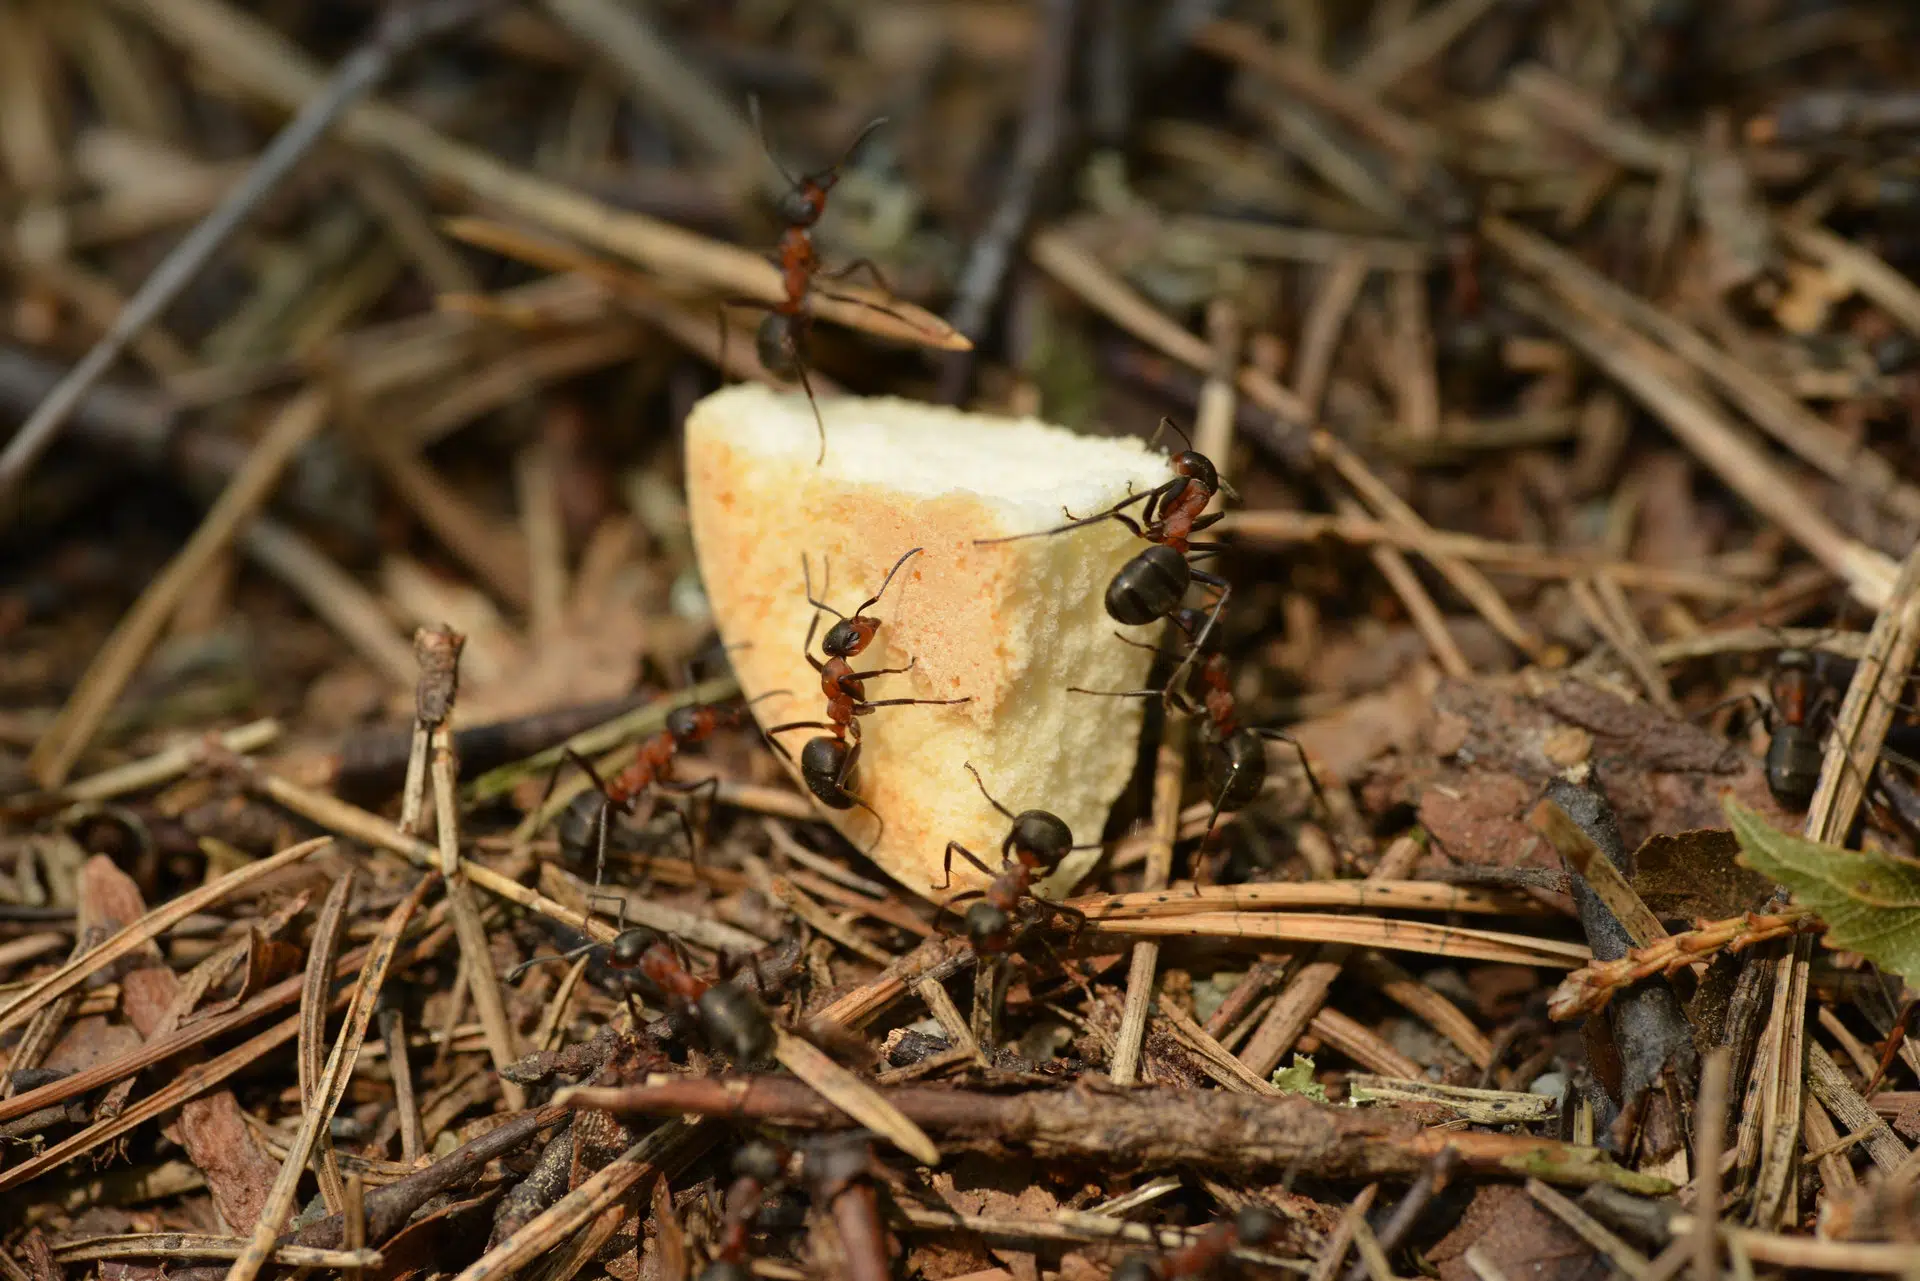 Ants eating a piece of bread 